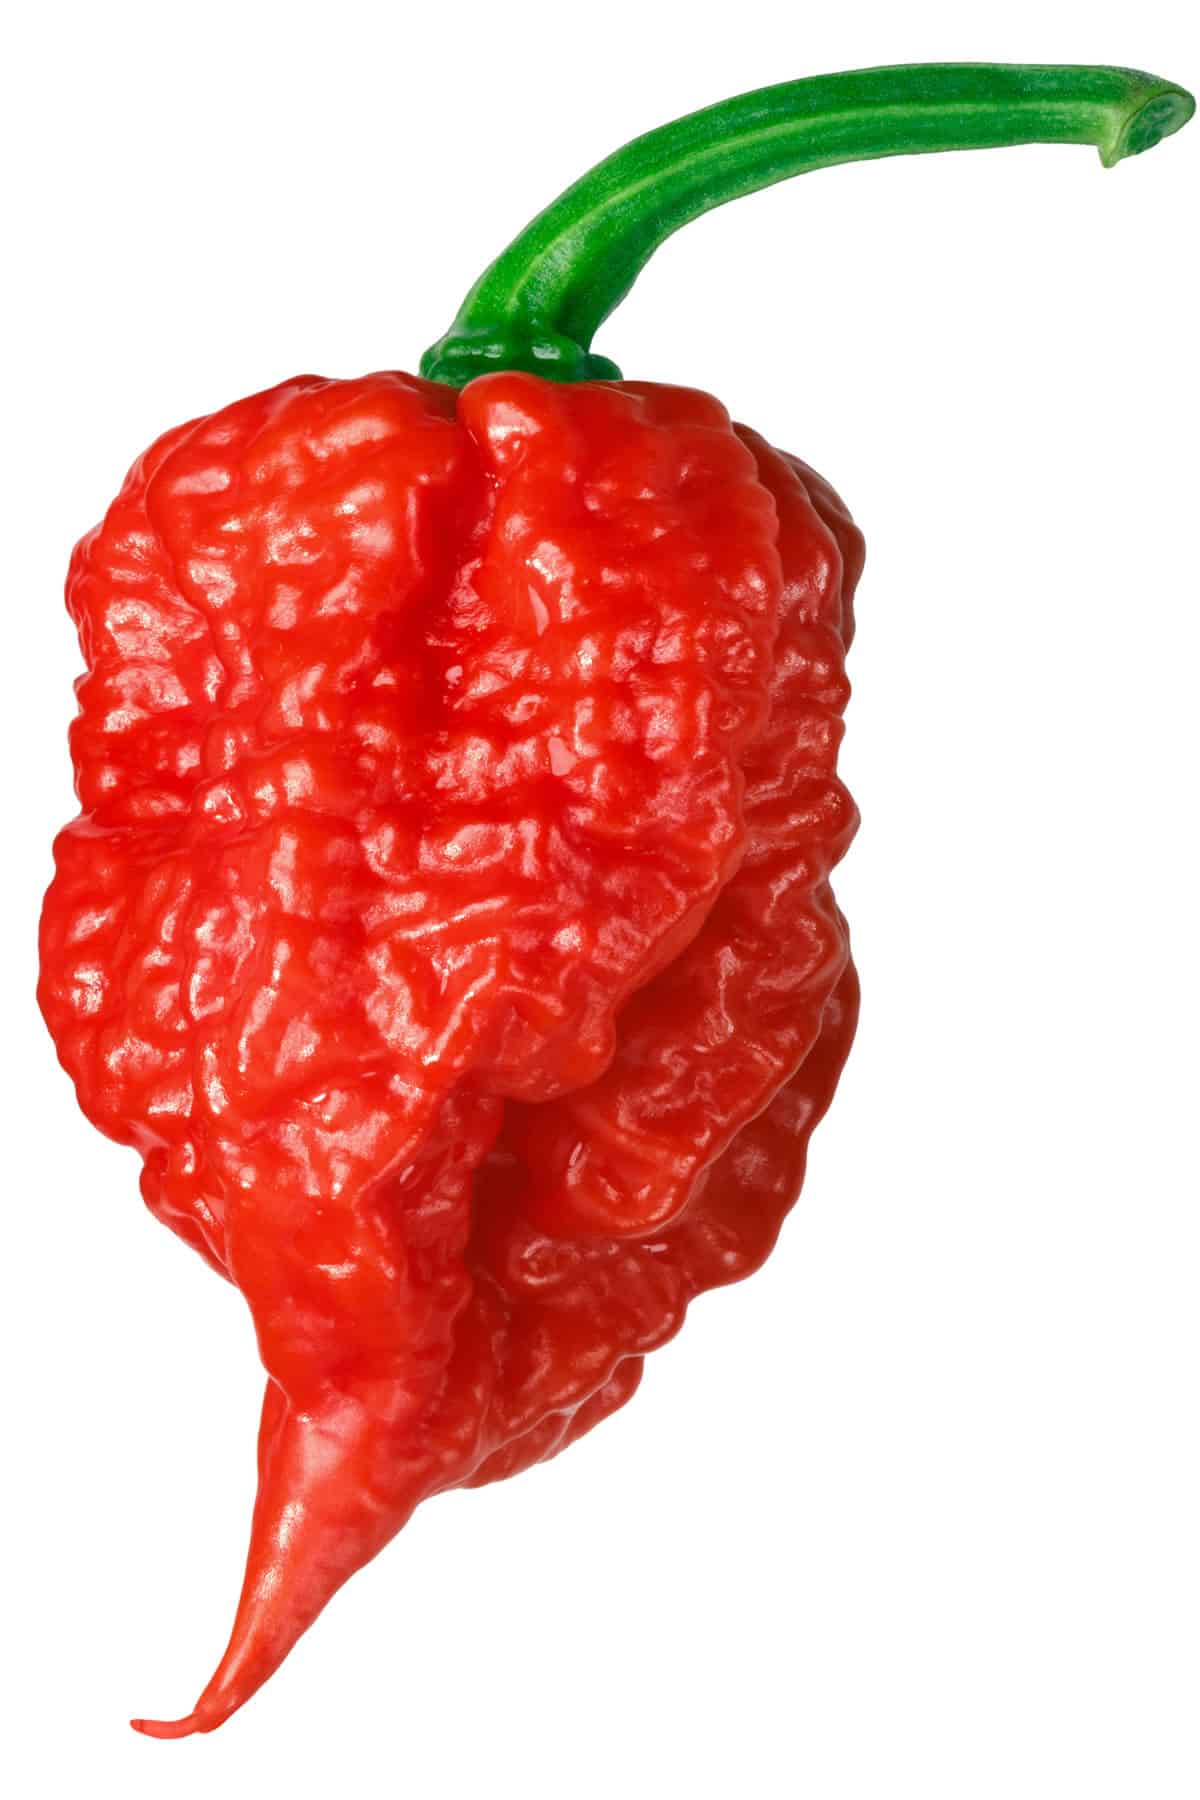 Carolina Reaper Hottest Pepper In The World All About It Chili Pepper Madness Wendy's chili recipe try to cut recipe in half, at least. carolina reaper hottest pepper in the